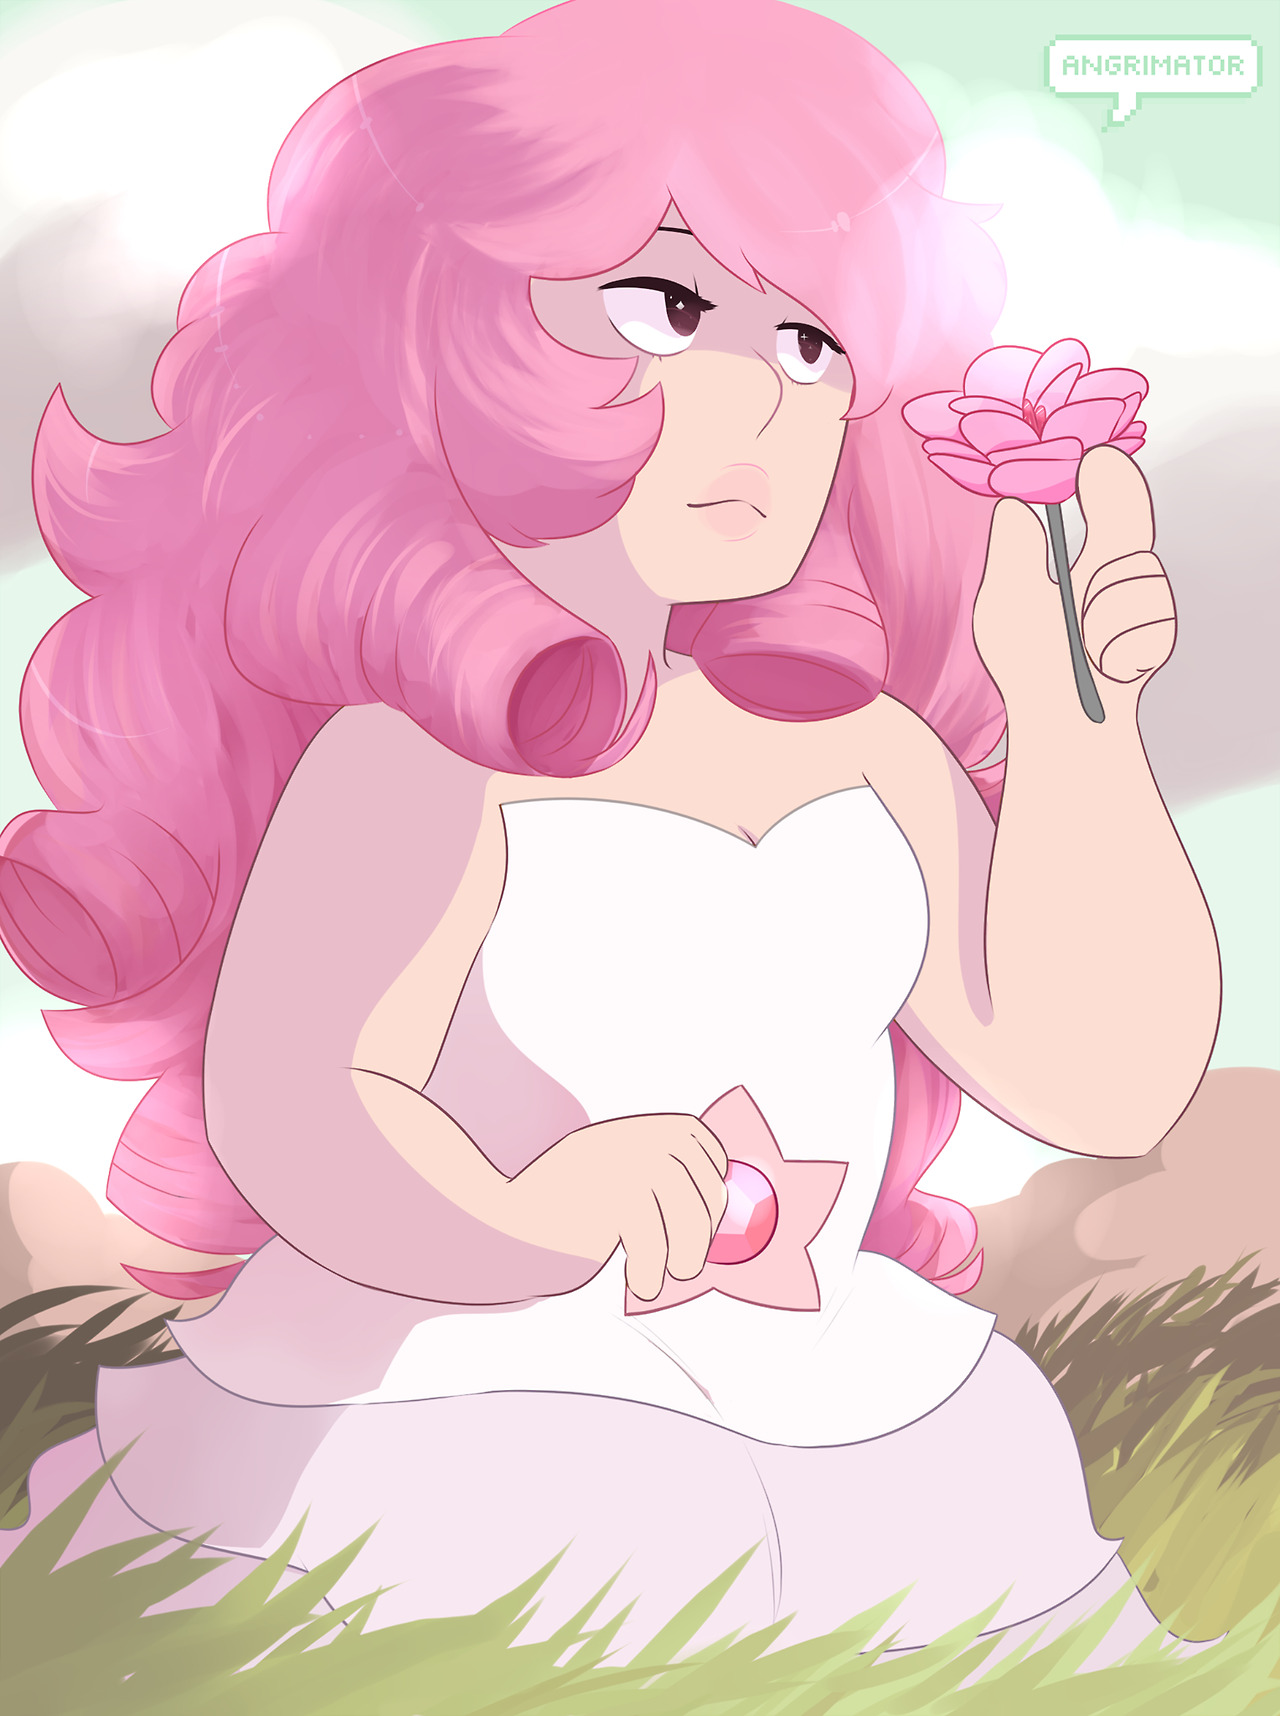 I made a drawing of Rose Quartz about a year ago so I decided to try to redraw it :P